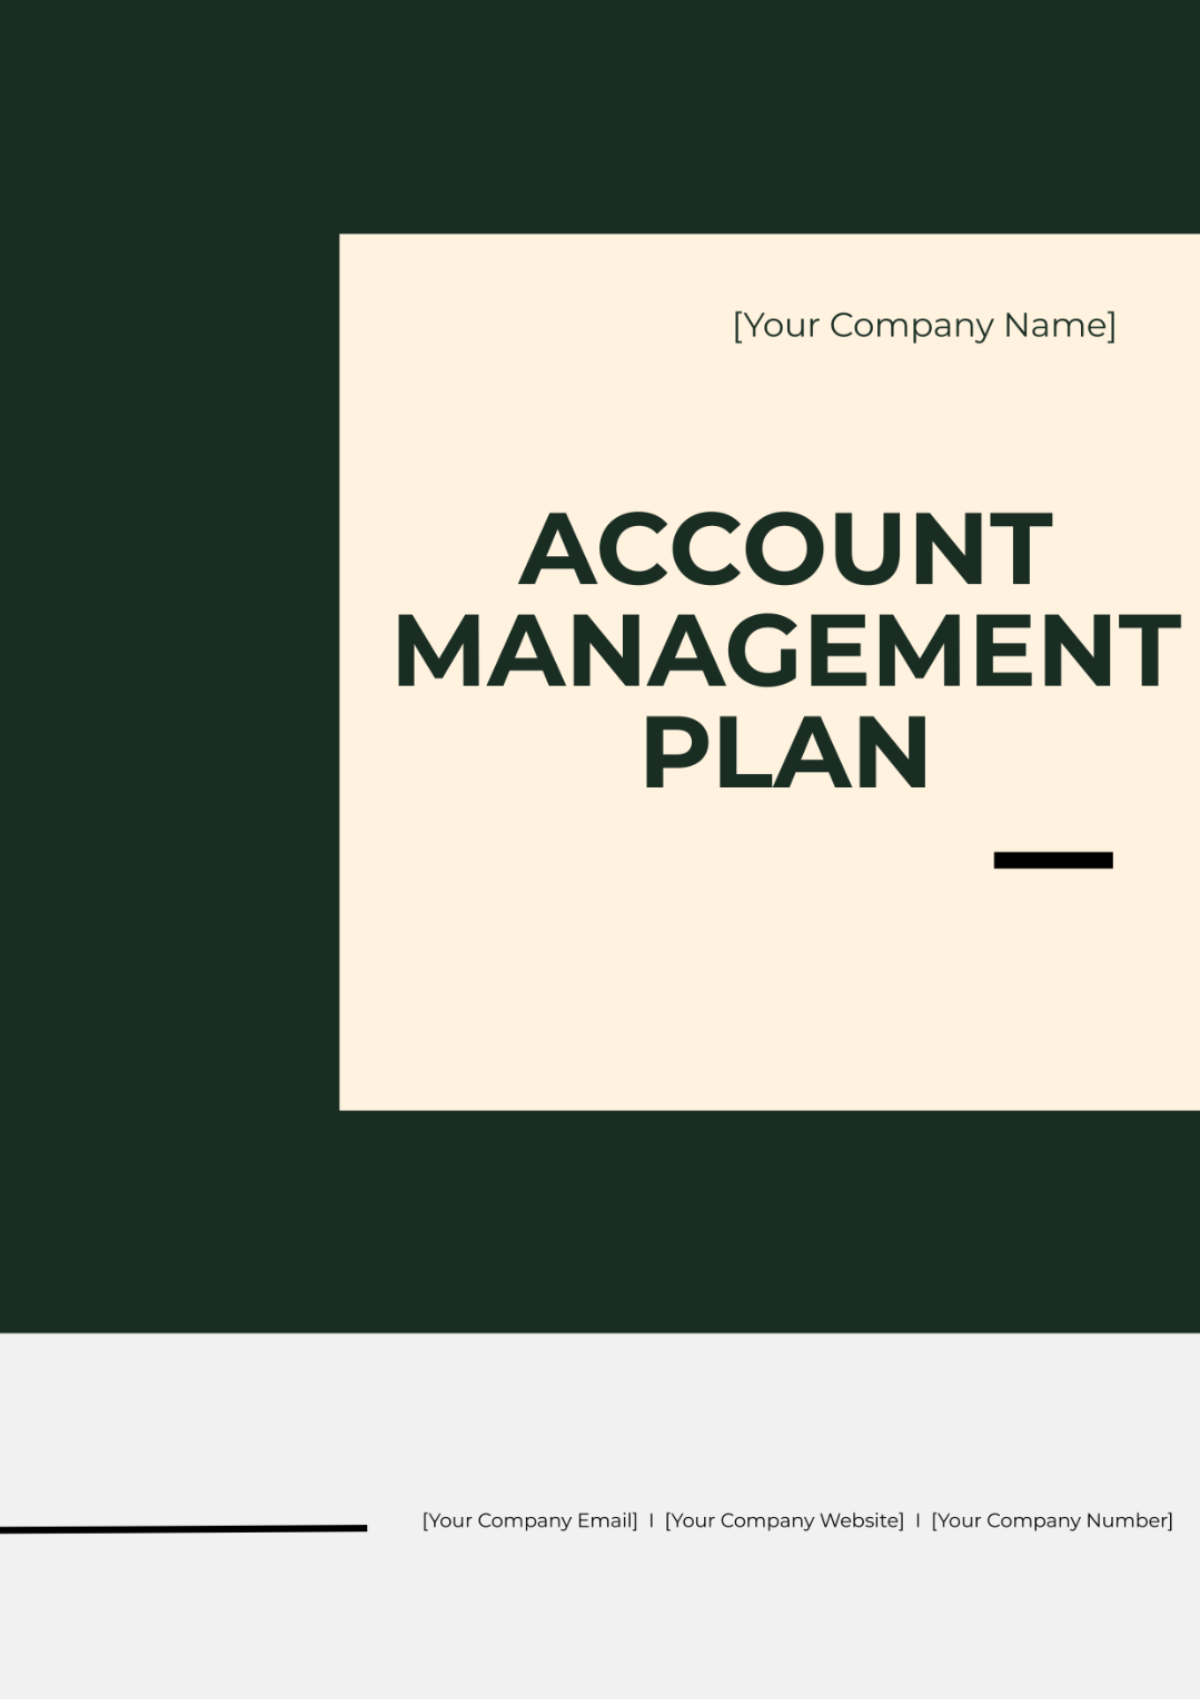 Free Account Management Plan Template